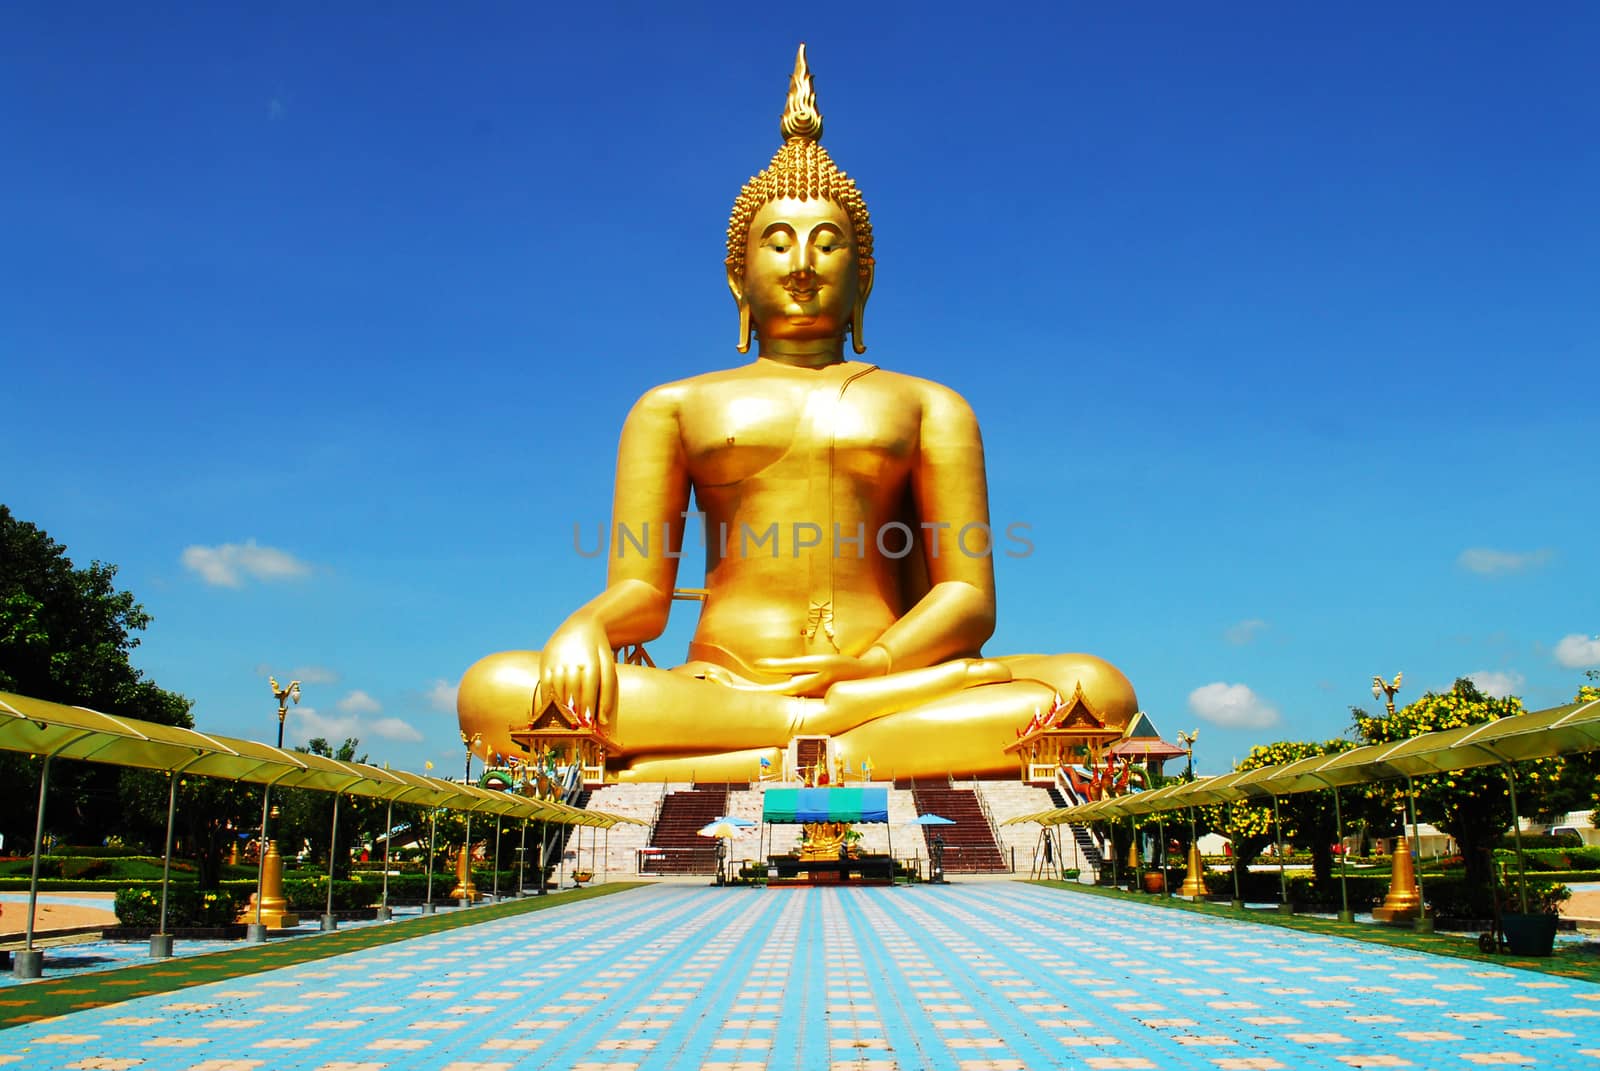 A big golden Buddha Image in the temple.







A Golden Buddha Image